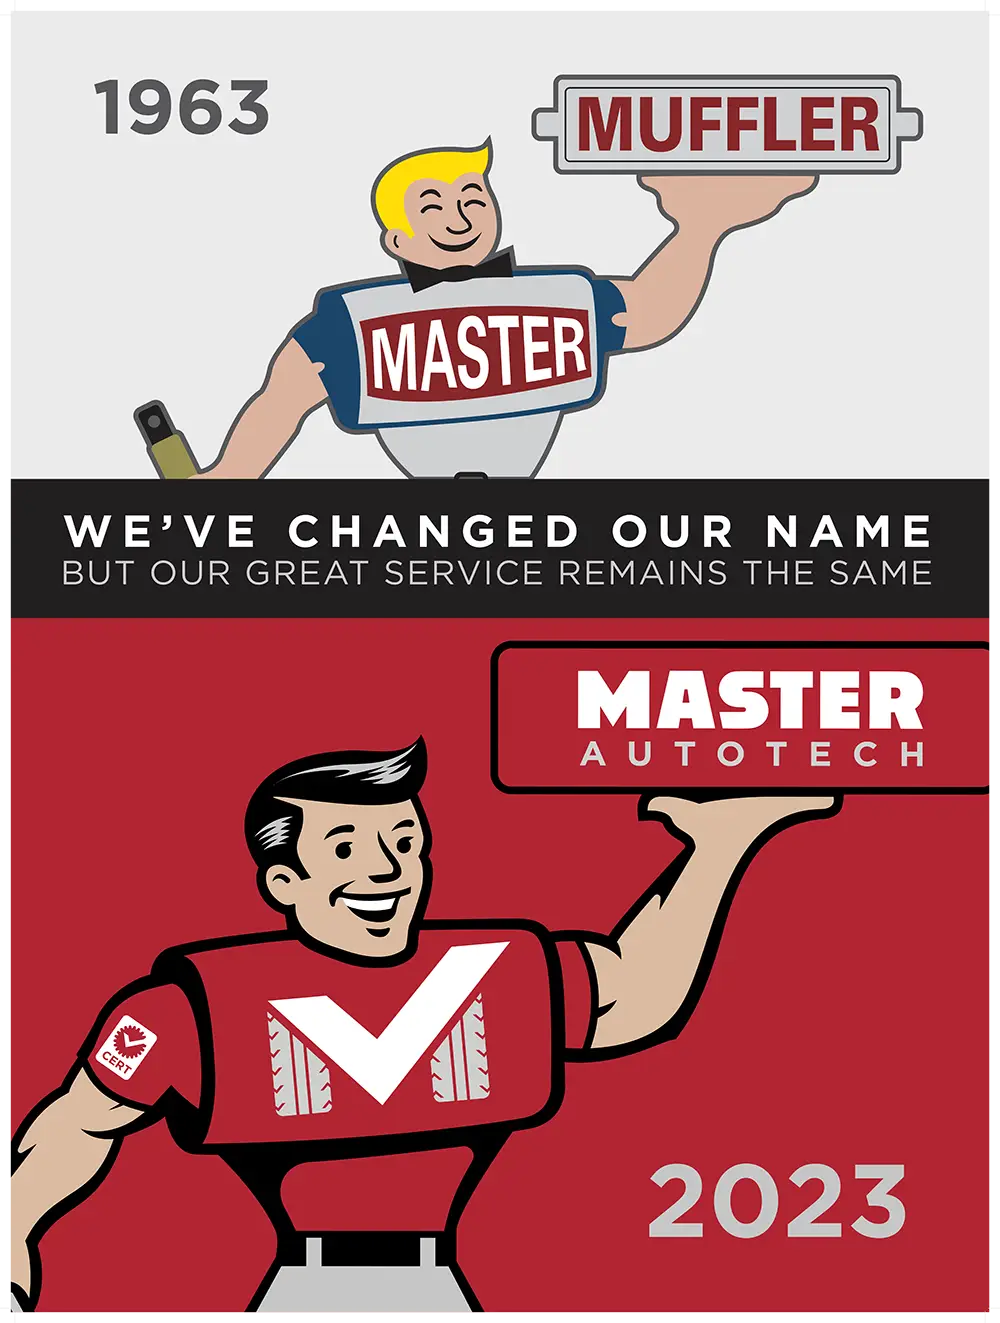 Master Muffler is now Master AutoTech. We've changed our name, but our great service remains the same.